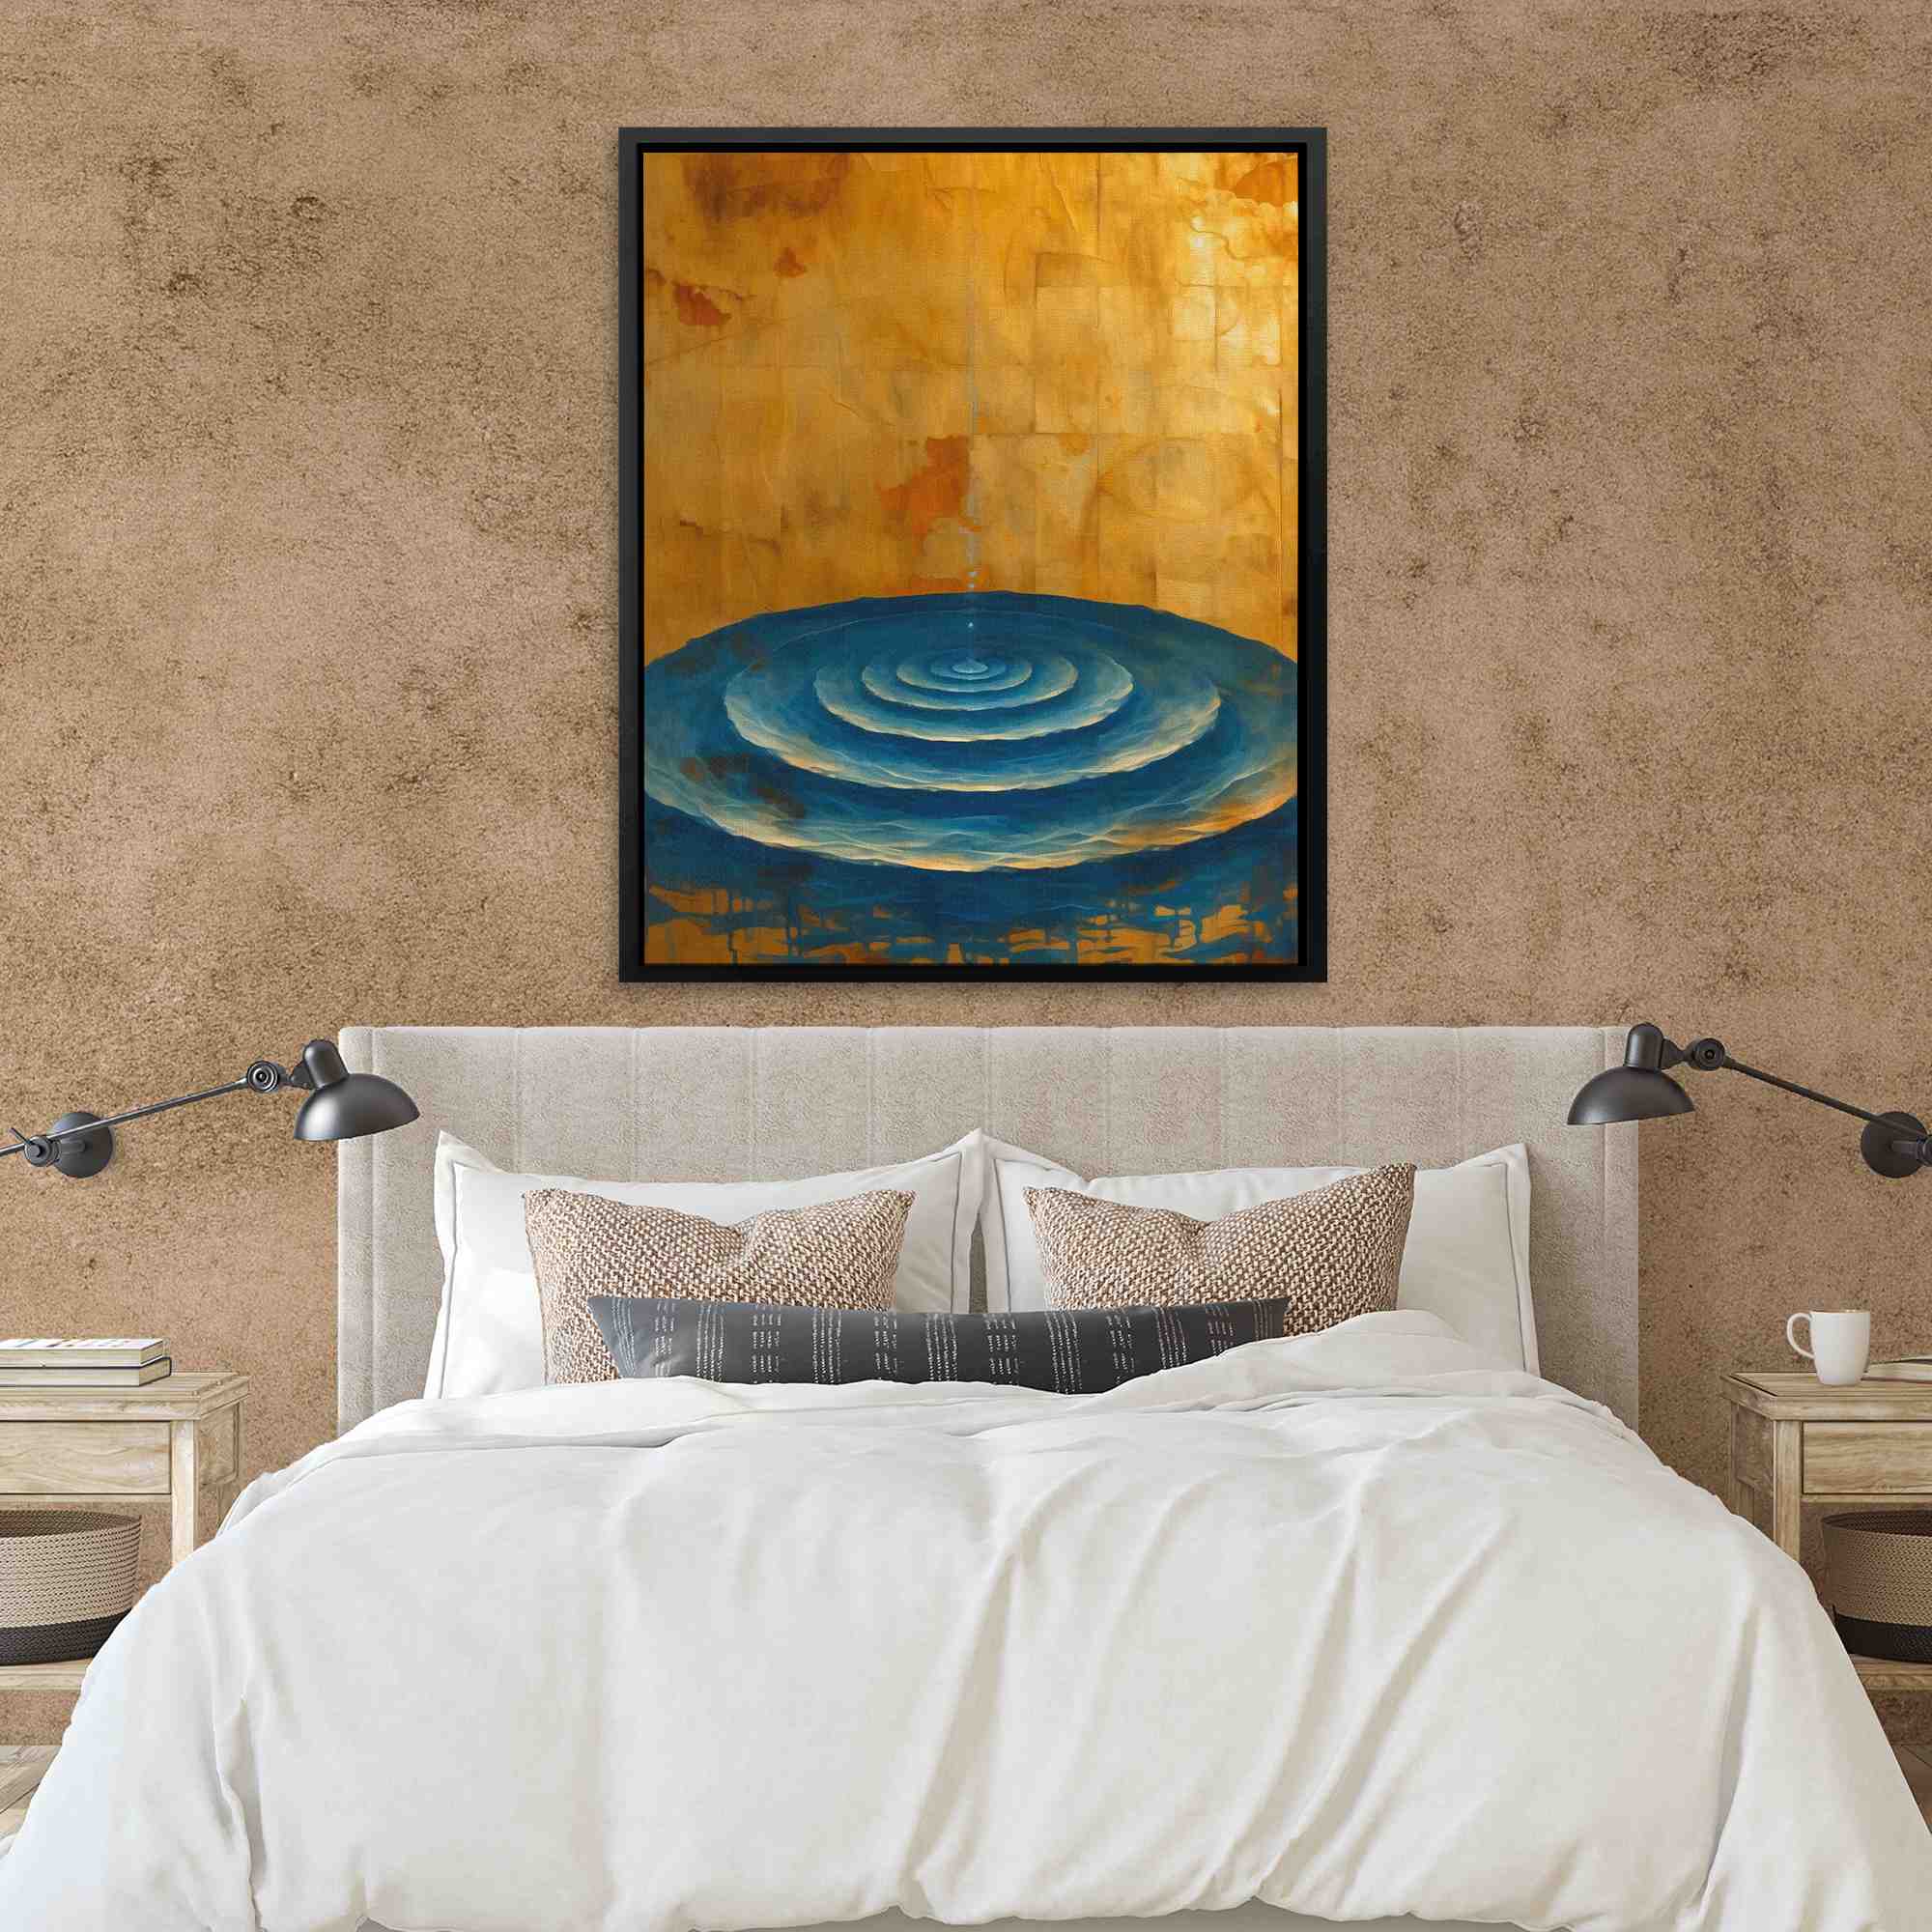 a painting on a canvas of a blue and yellow circle